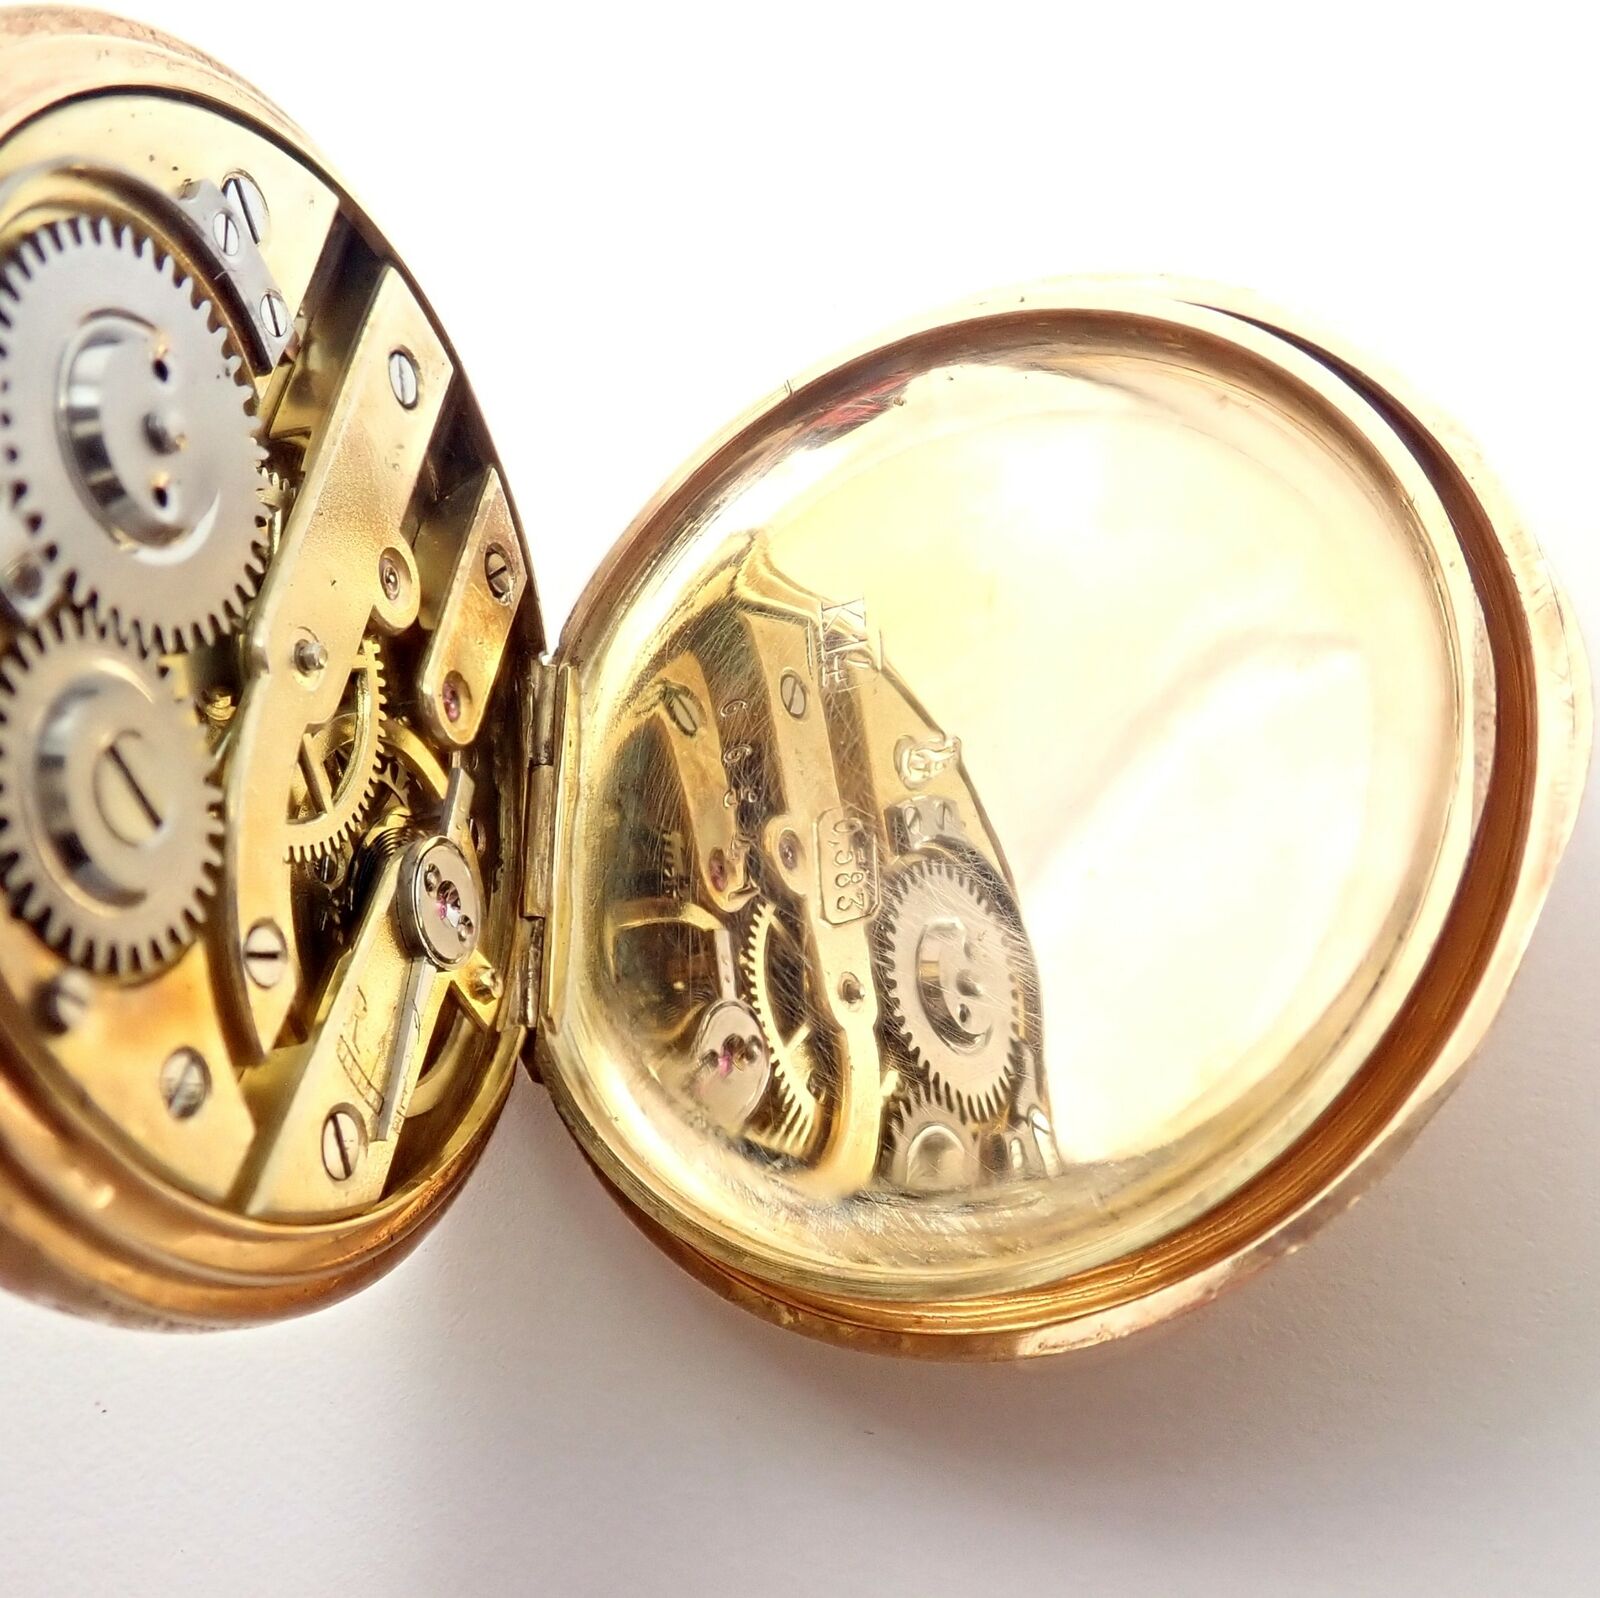 Estate Jewelry & Watches:Watches, Parts & Accessories:Watches:Pocket Watches Vintage! Swiss 14k Yellow Gold Ladies Pocket Watch 33mm High Grade Movement